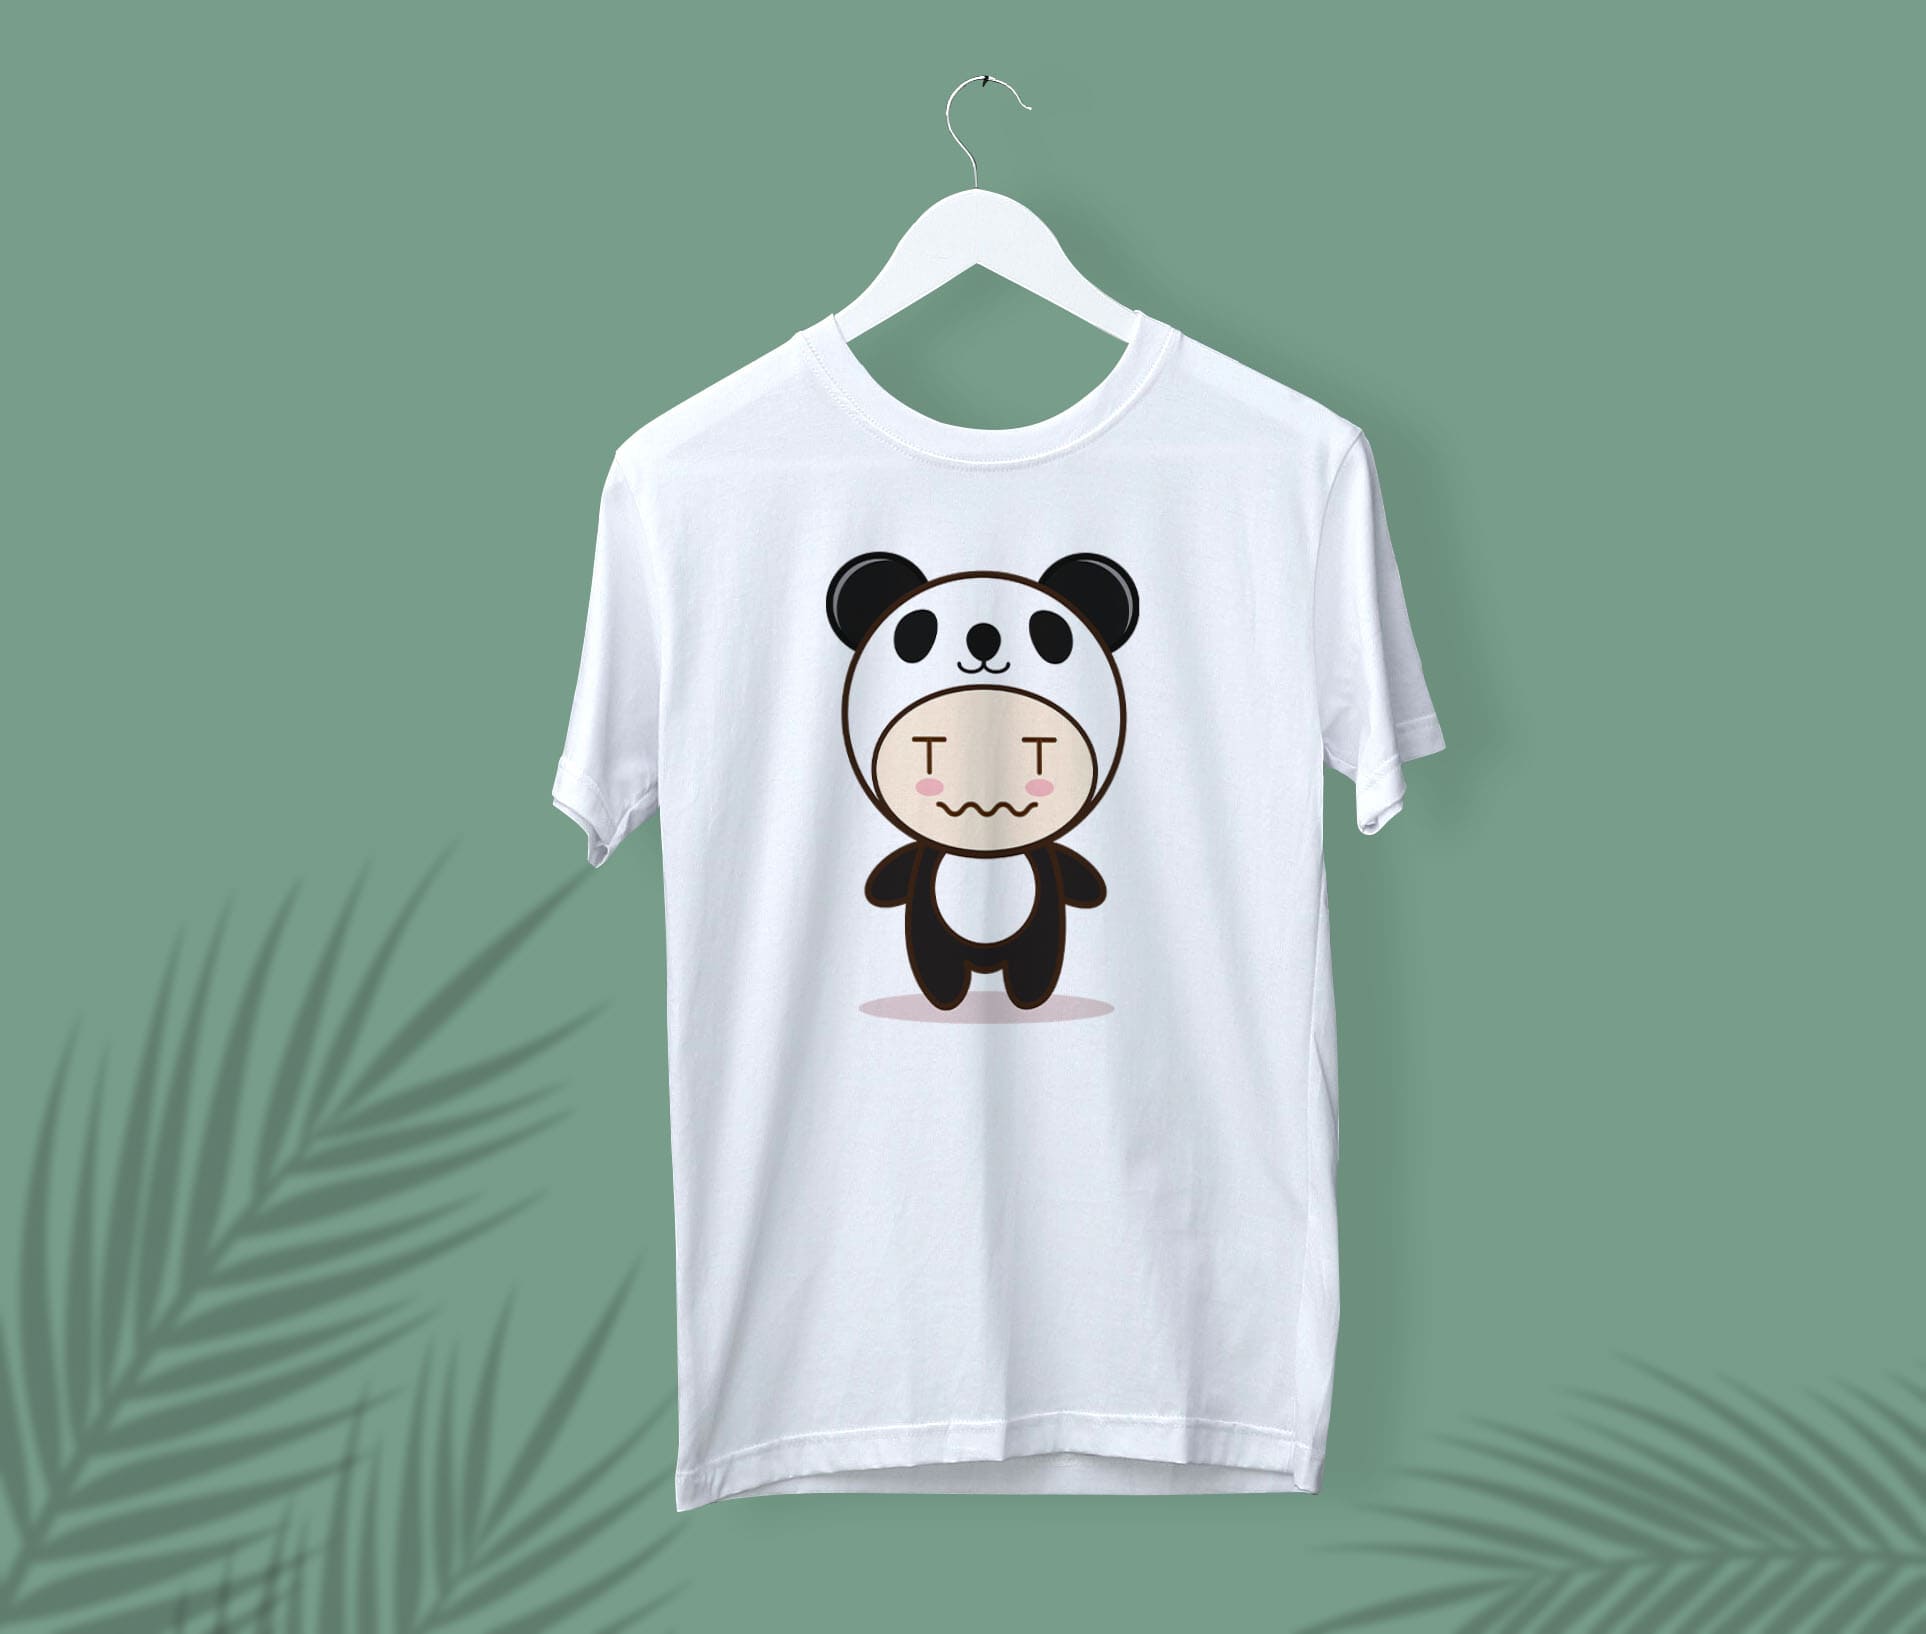 White t-shirt with a tearful girl panda on a white hanger on a turquoise background.